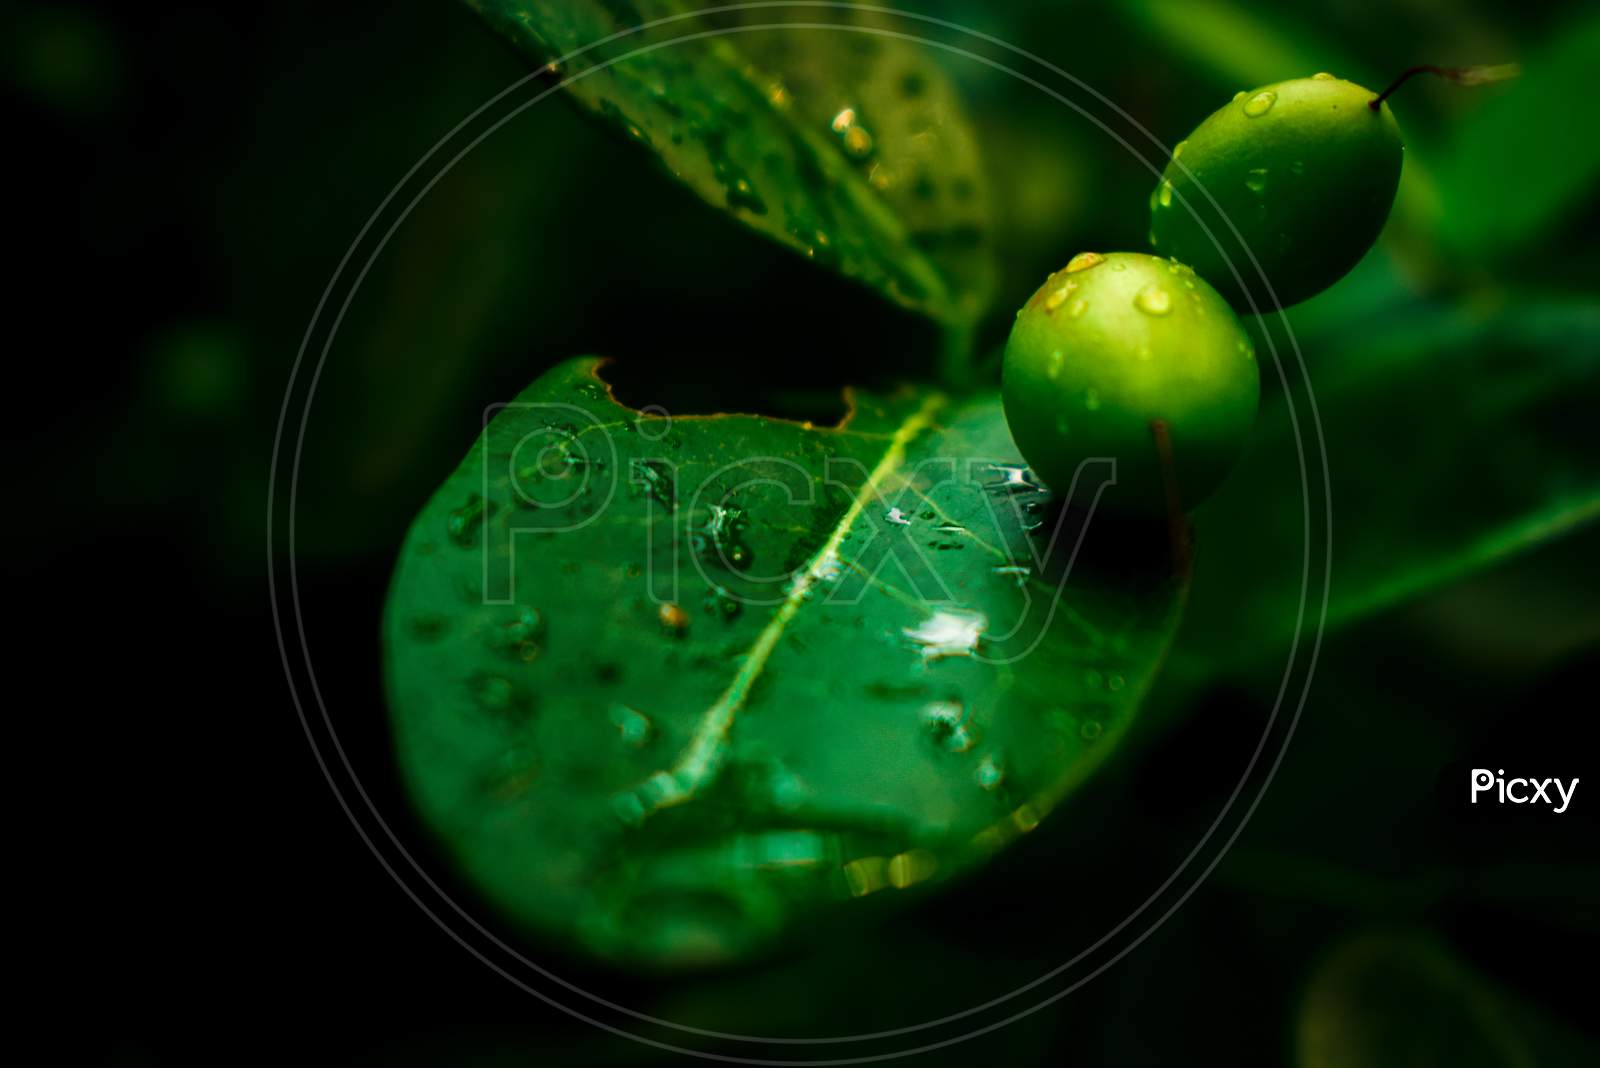 Fruits On The leaf With Water Drops